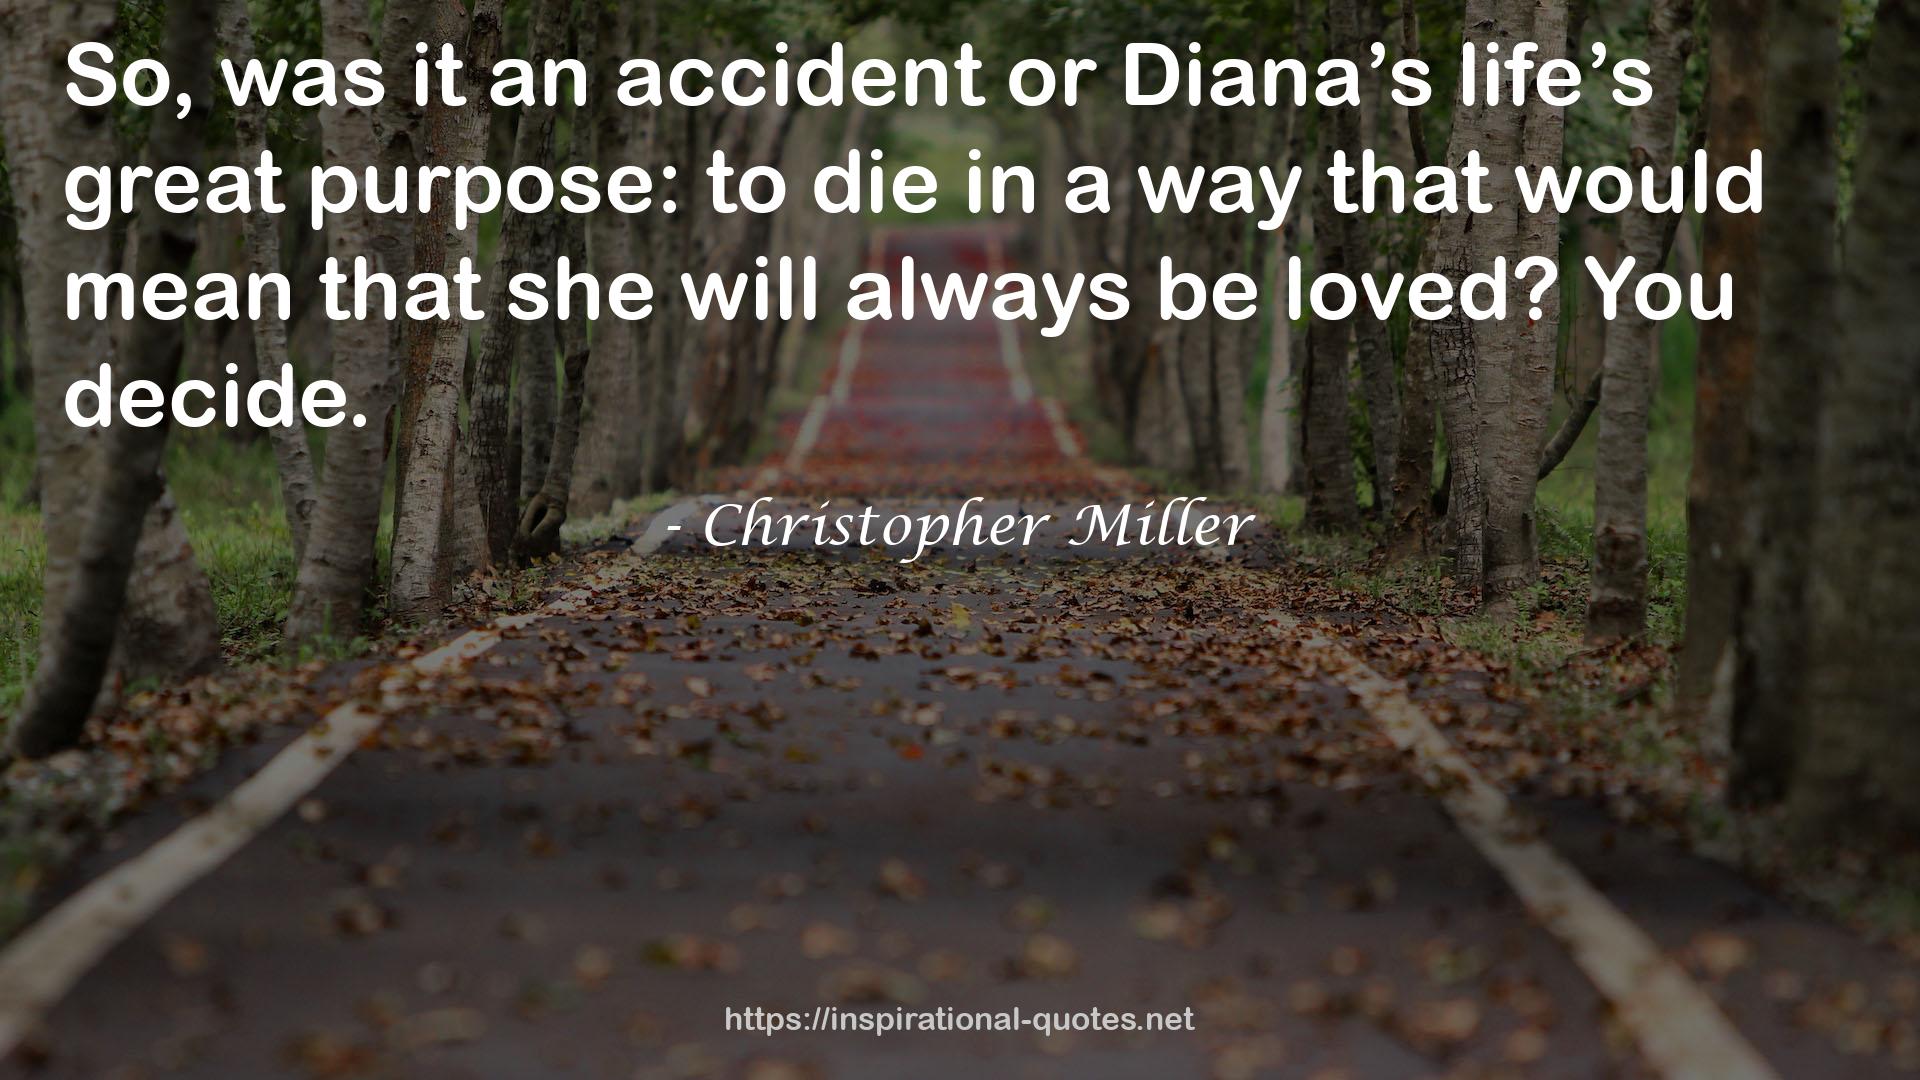 Christopher Miller QUOTES